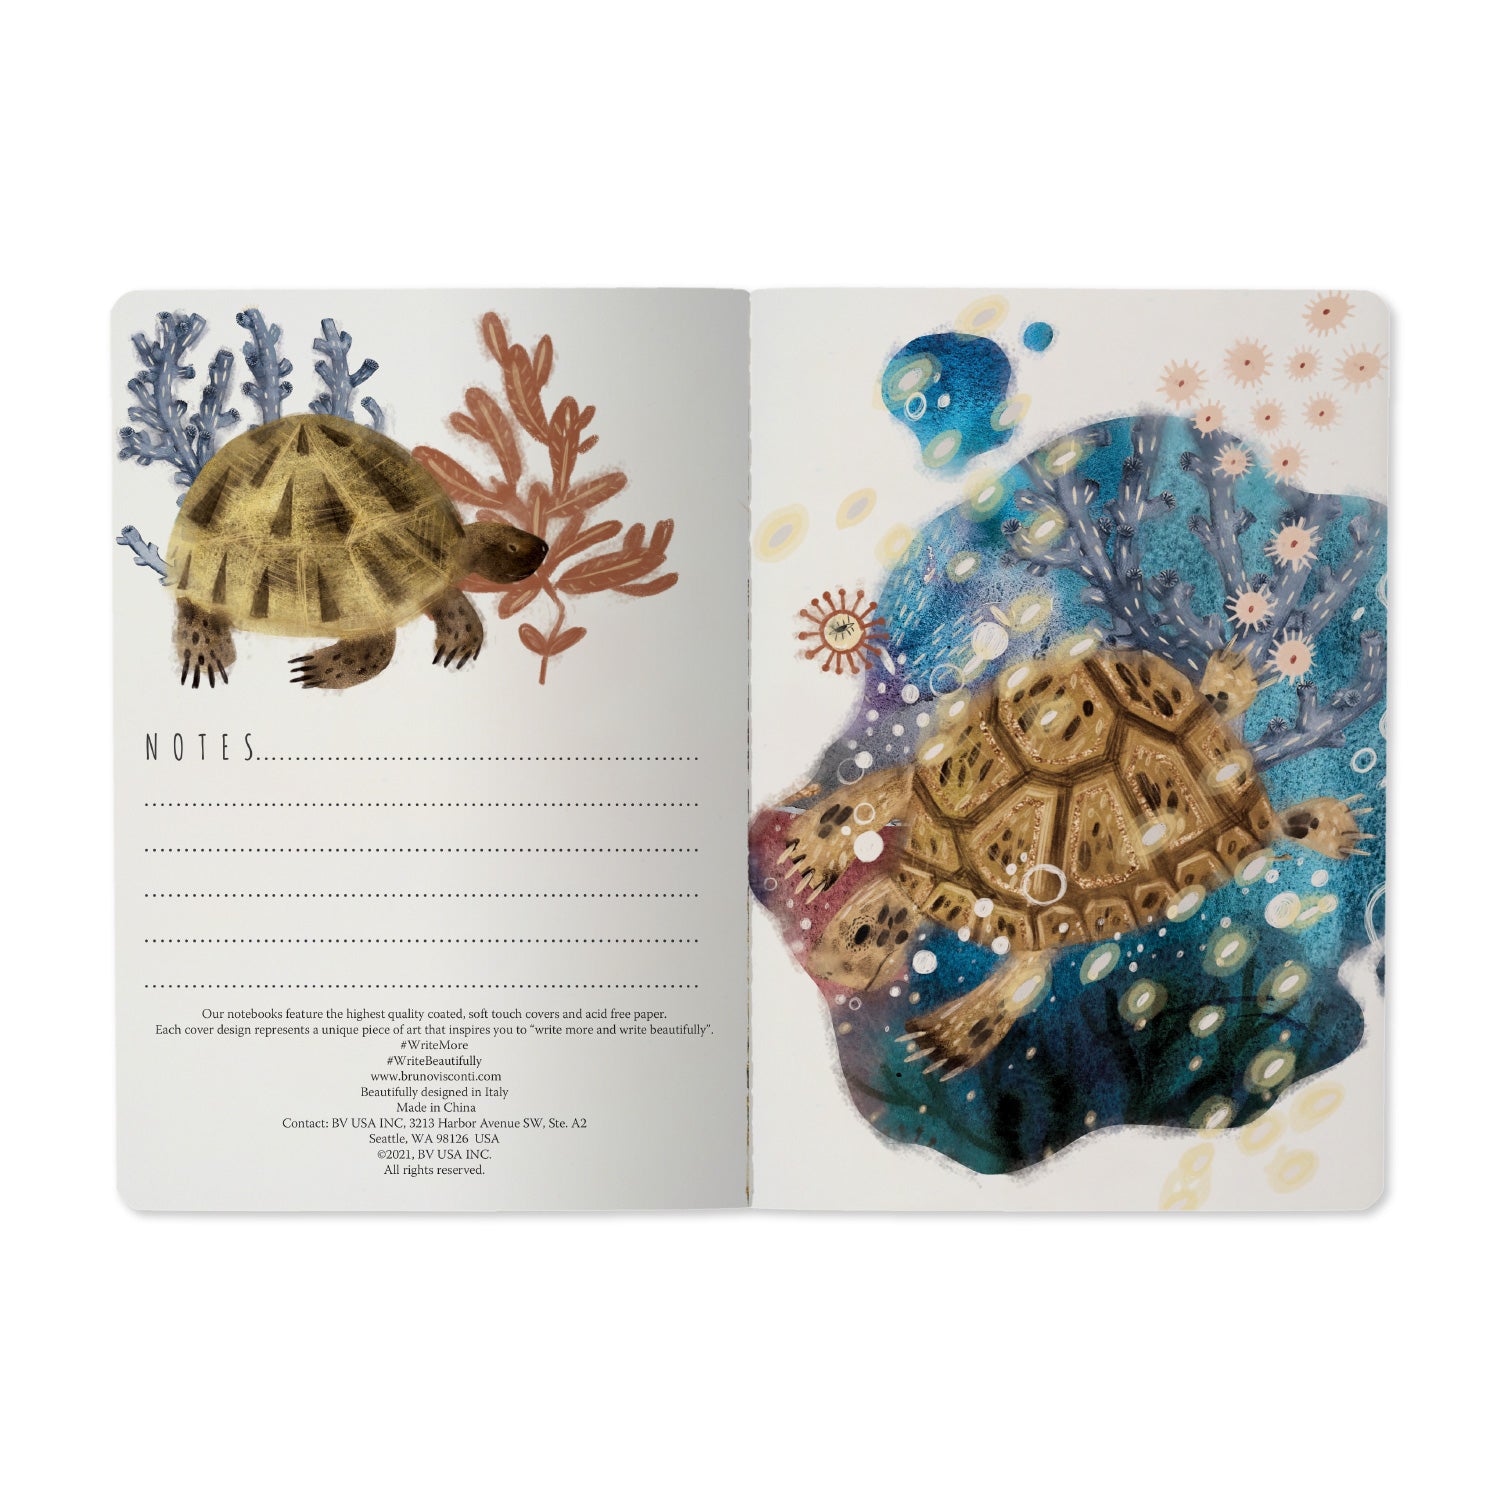 Coral Notebook